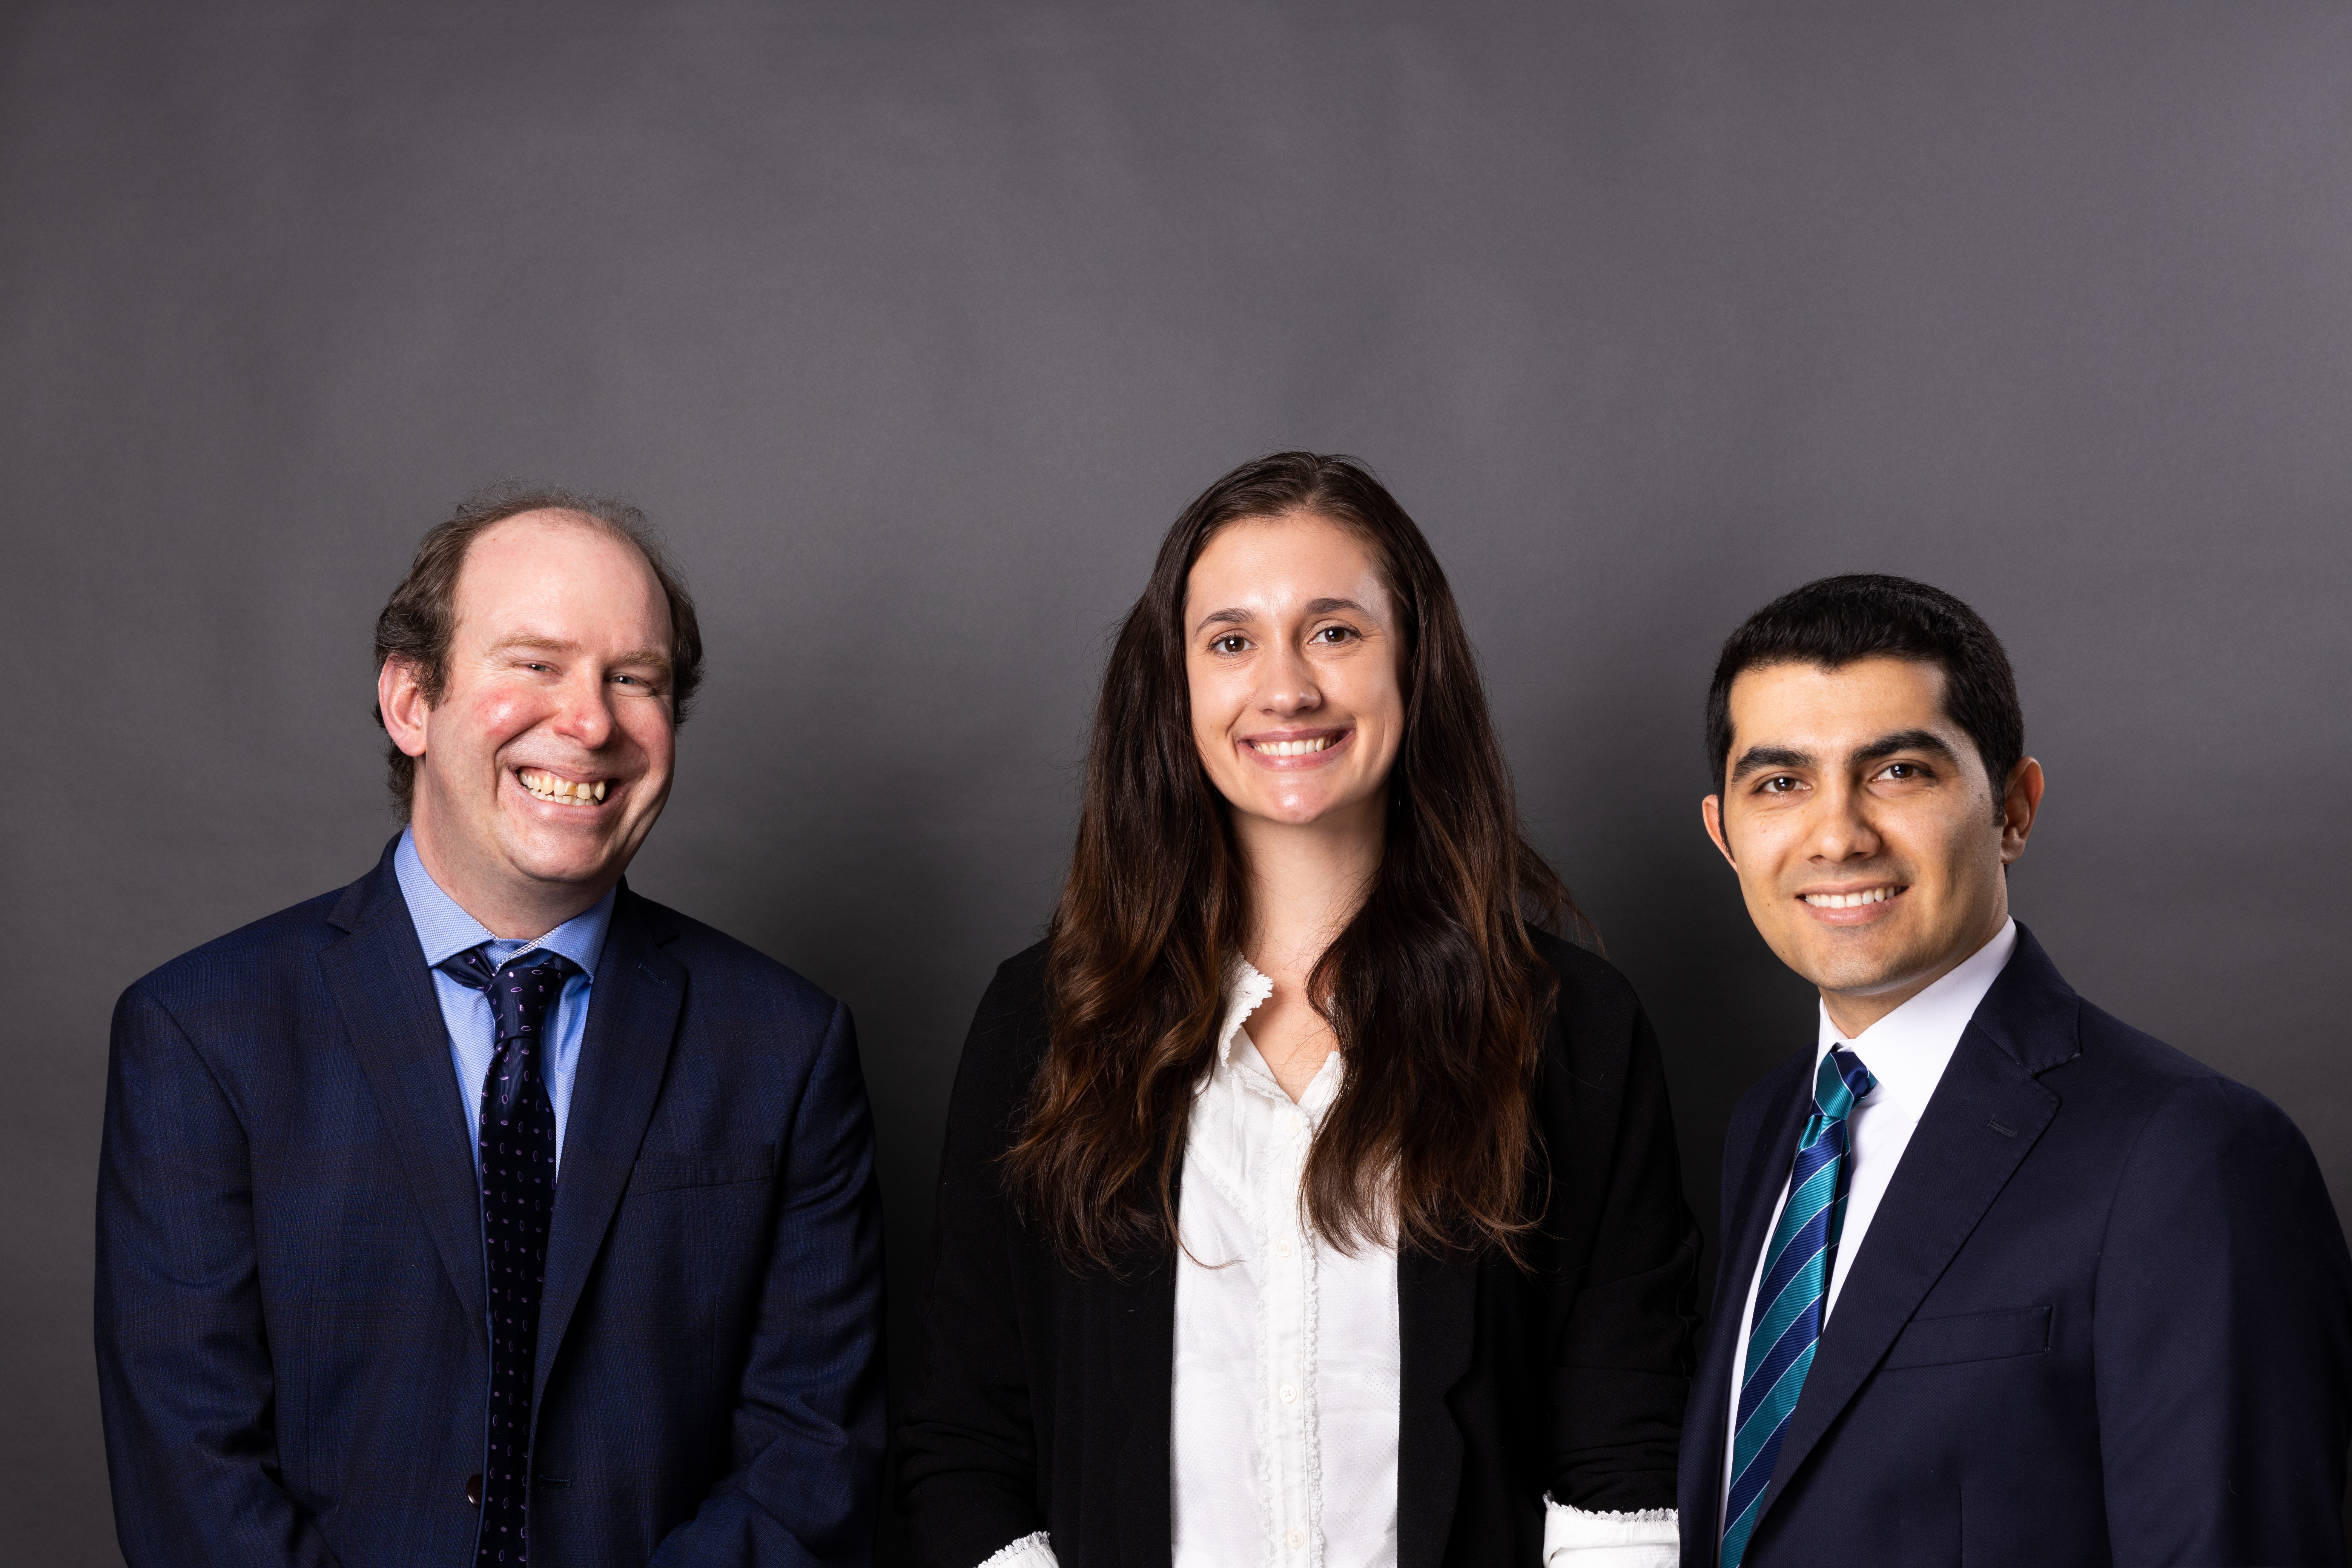 Dr Christopher Ireland, Dr Samantha Anderson and Bardiya Valizadeh, the three co-founders of start-up DePoly.